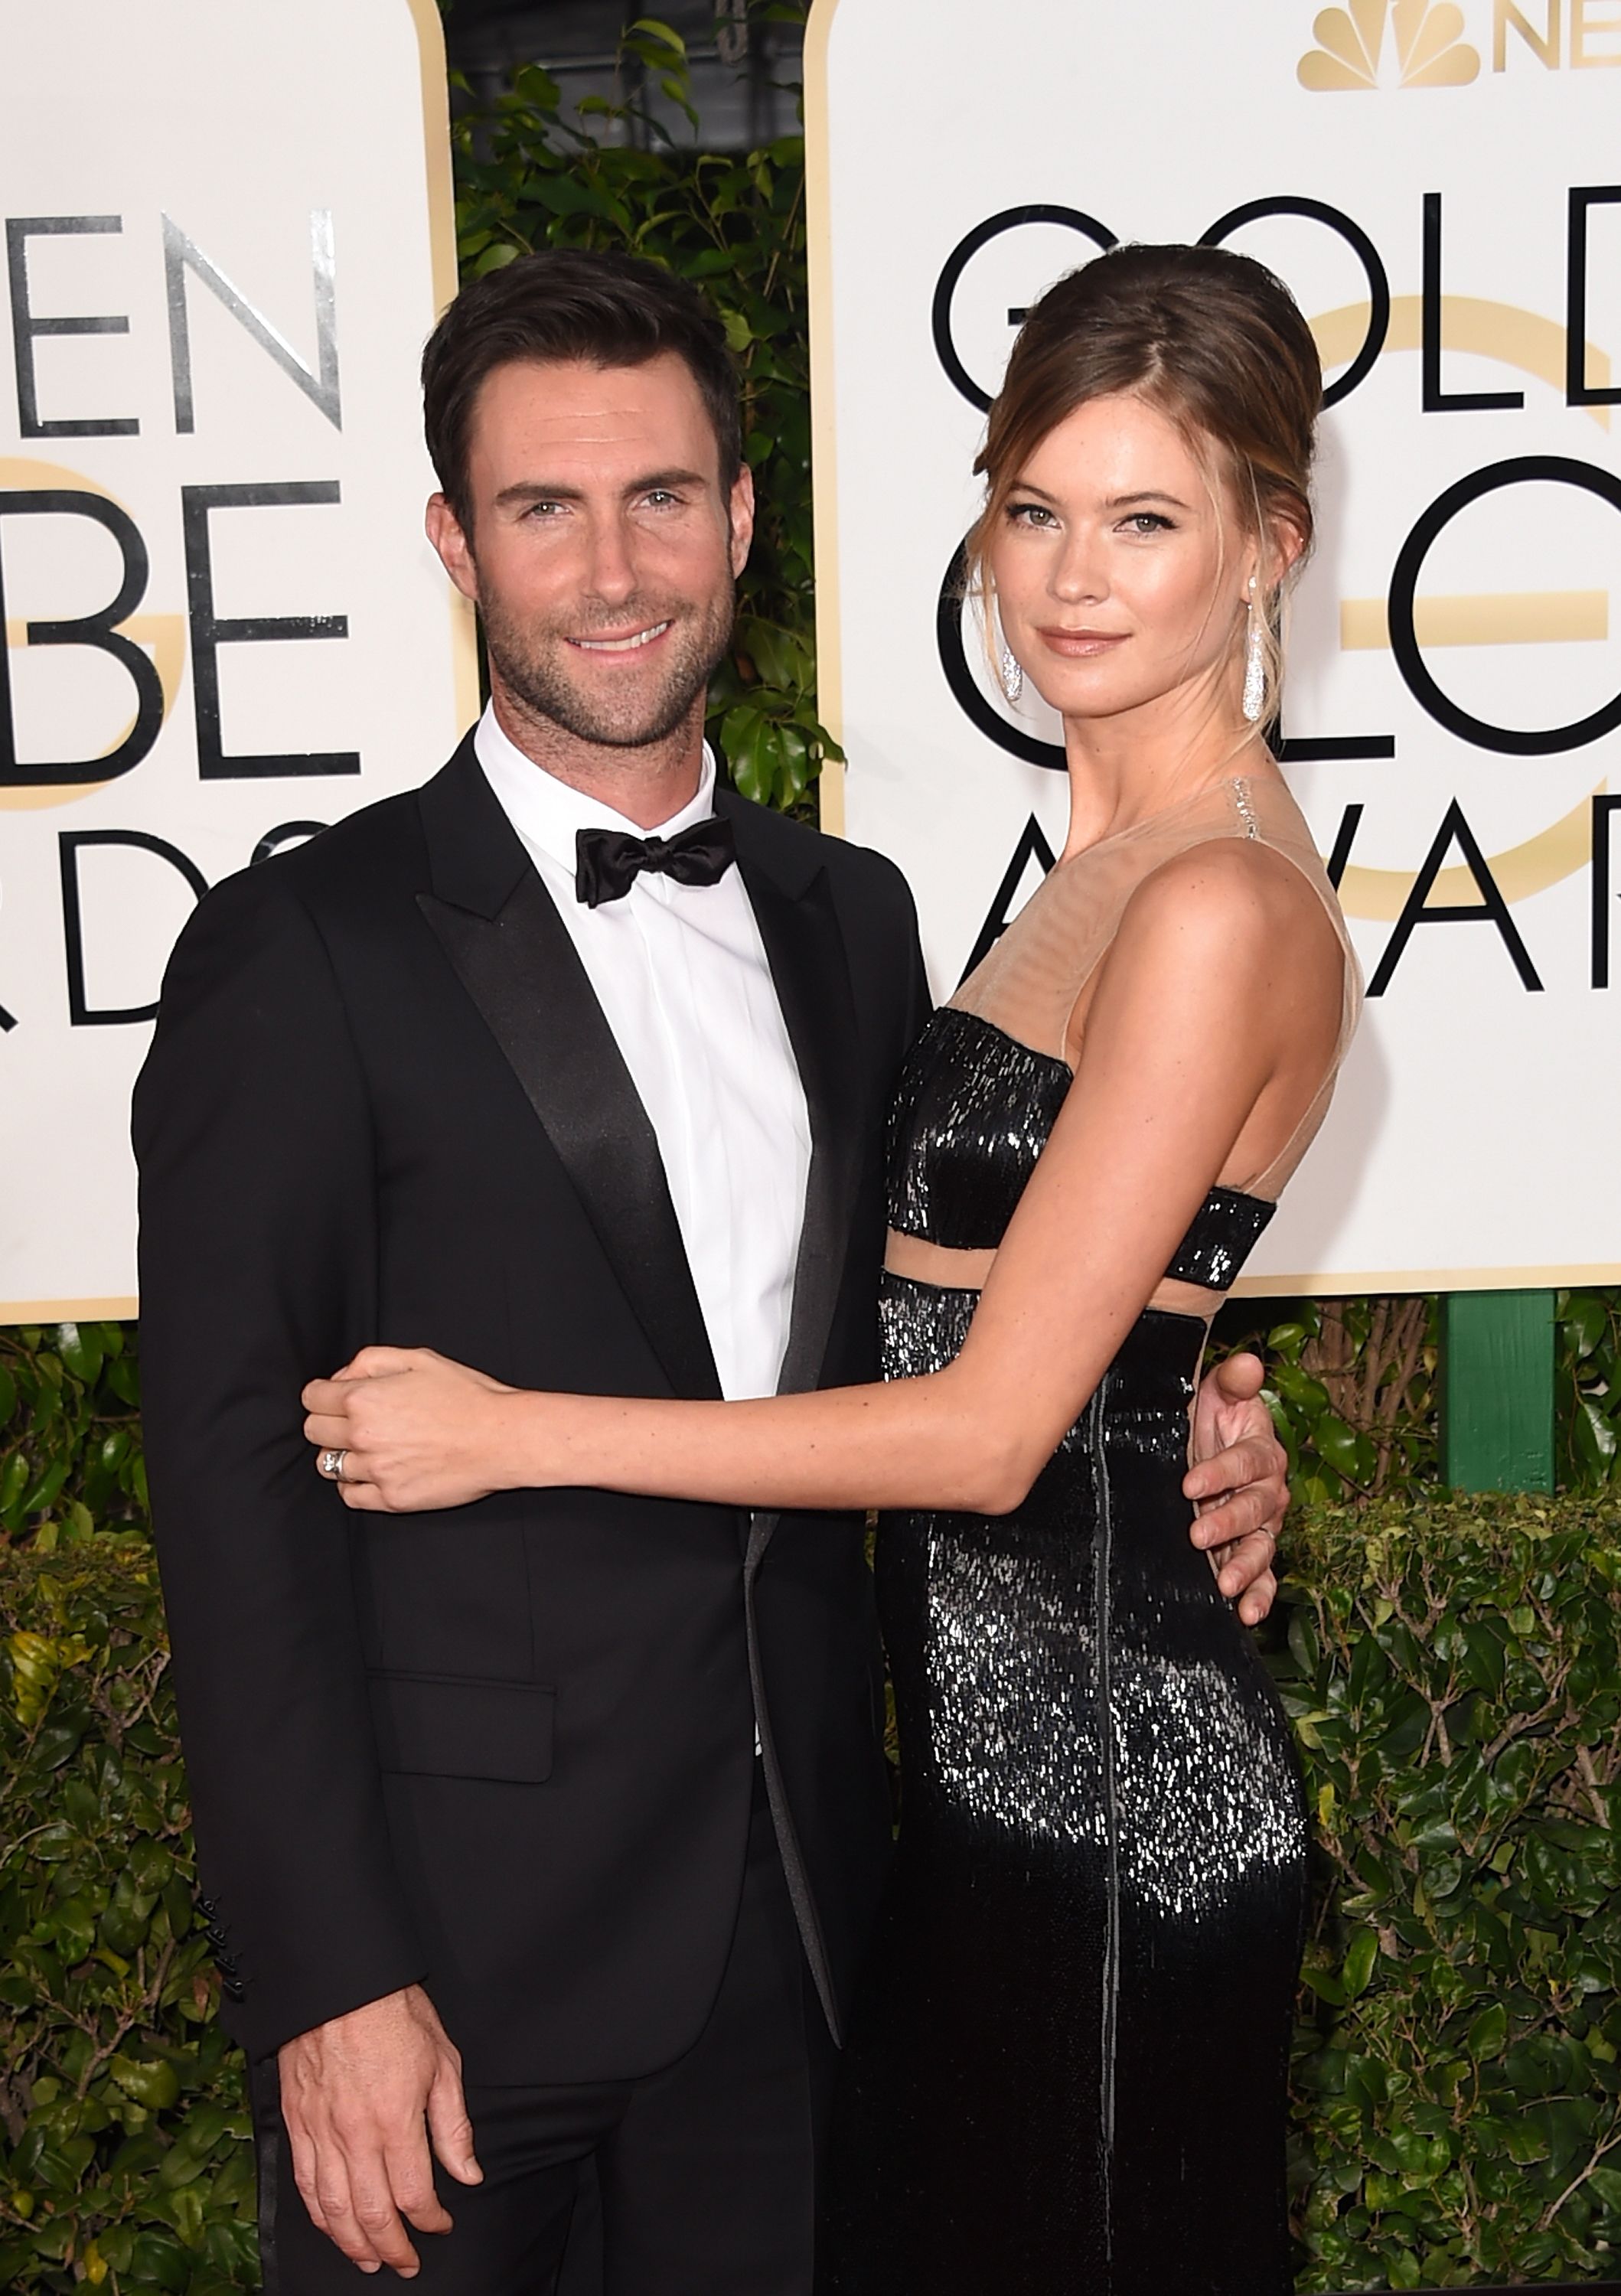 Behati Prinsloo Posts Birthday Party Instagram as Adam Levine's Daughter, Gio, Turns One